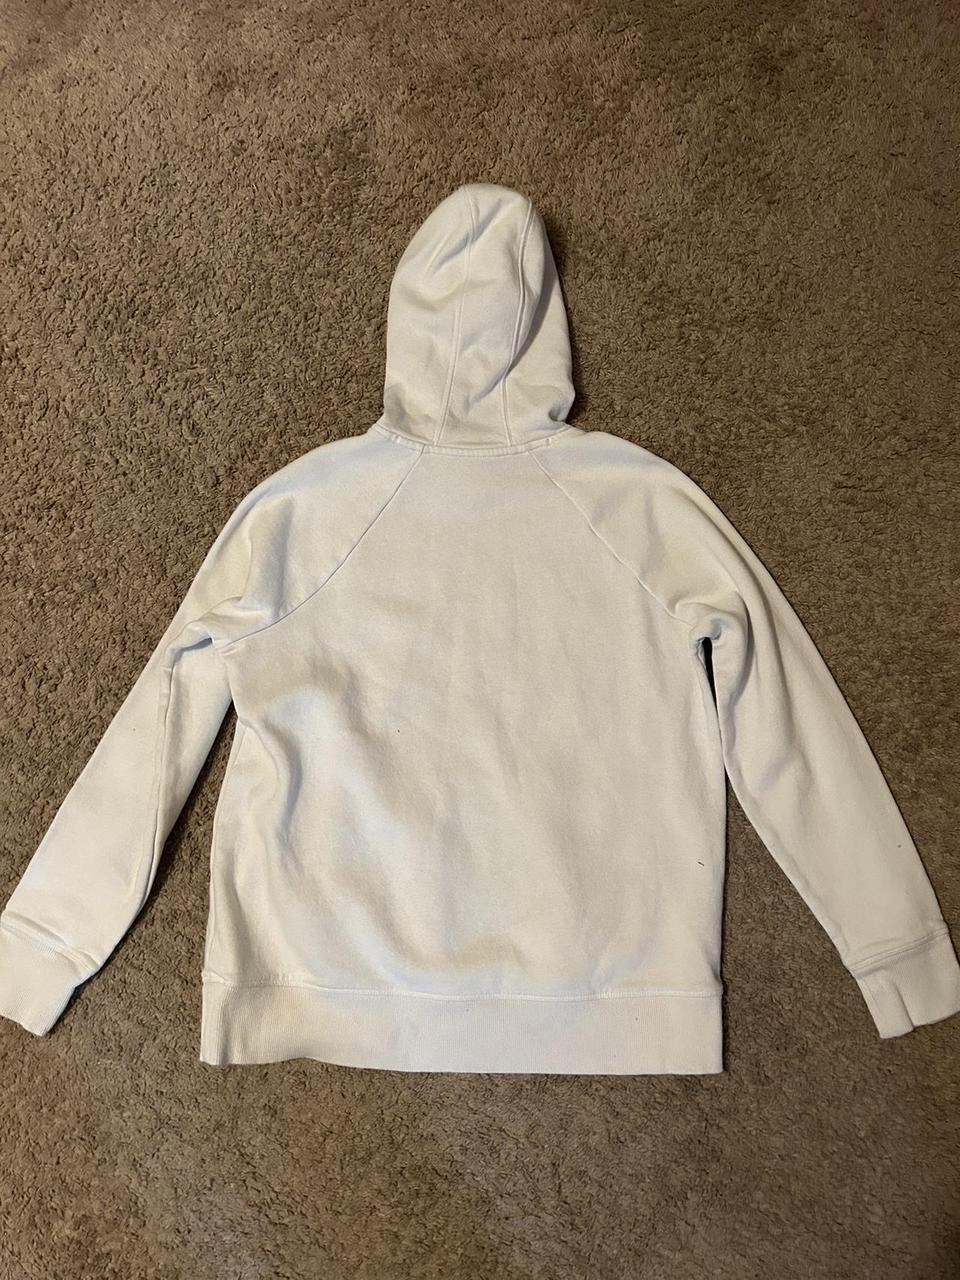 Under Armour white hoodie, size small - Depop